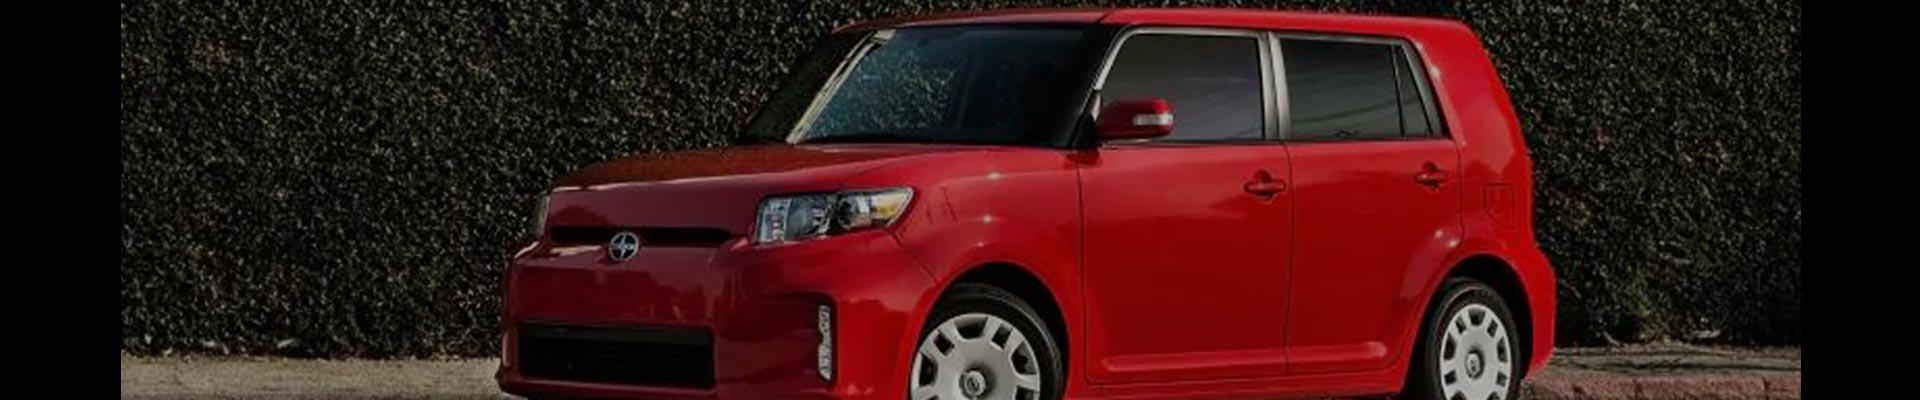 Shop Replacement and OEM 2004 Scion xB Parts with Discounted Price on the Net